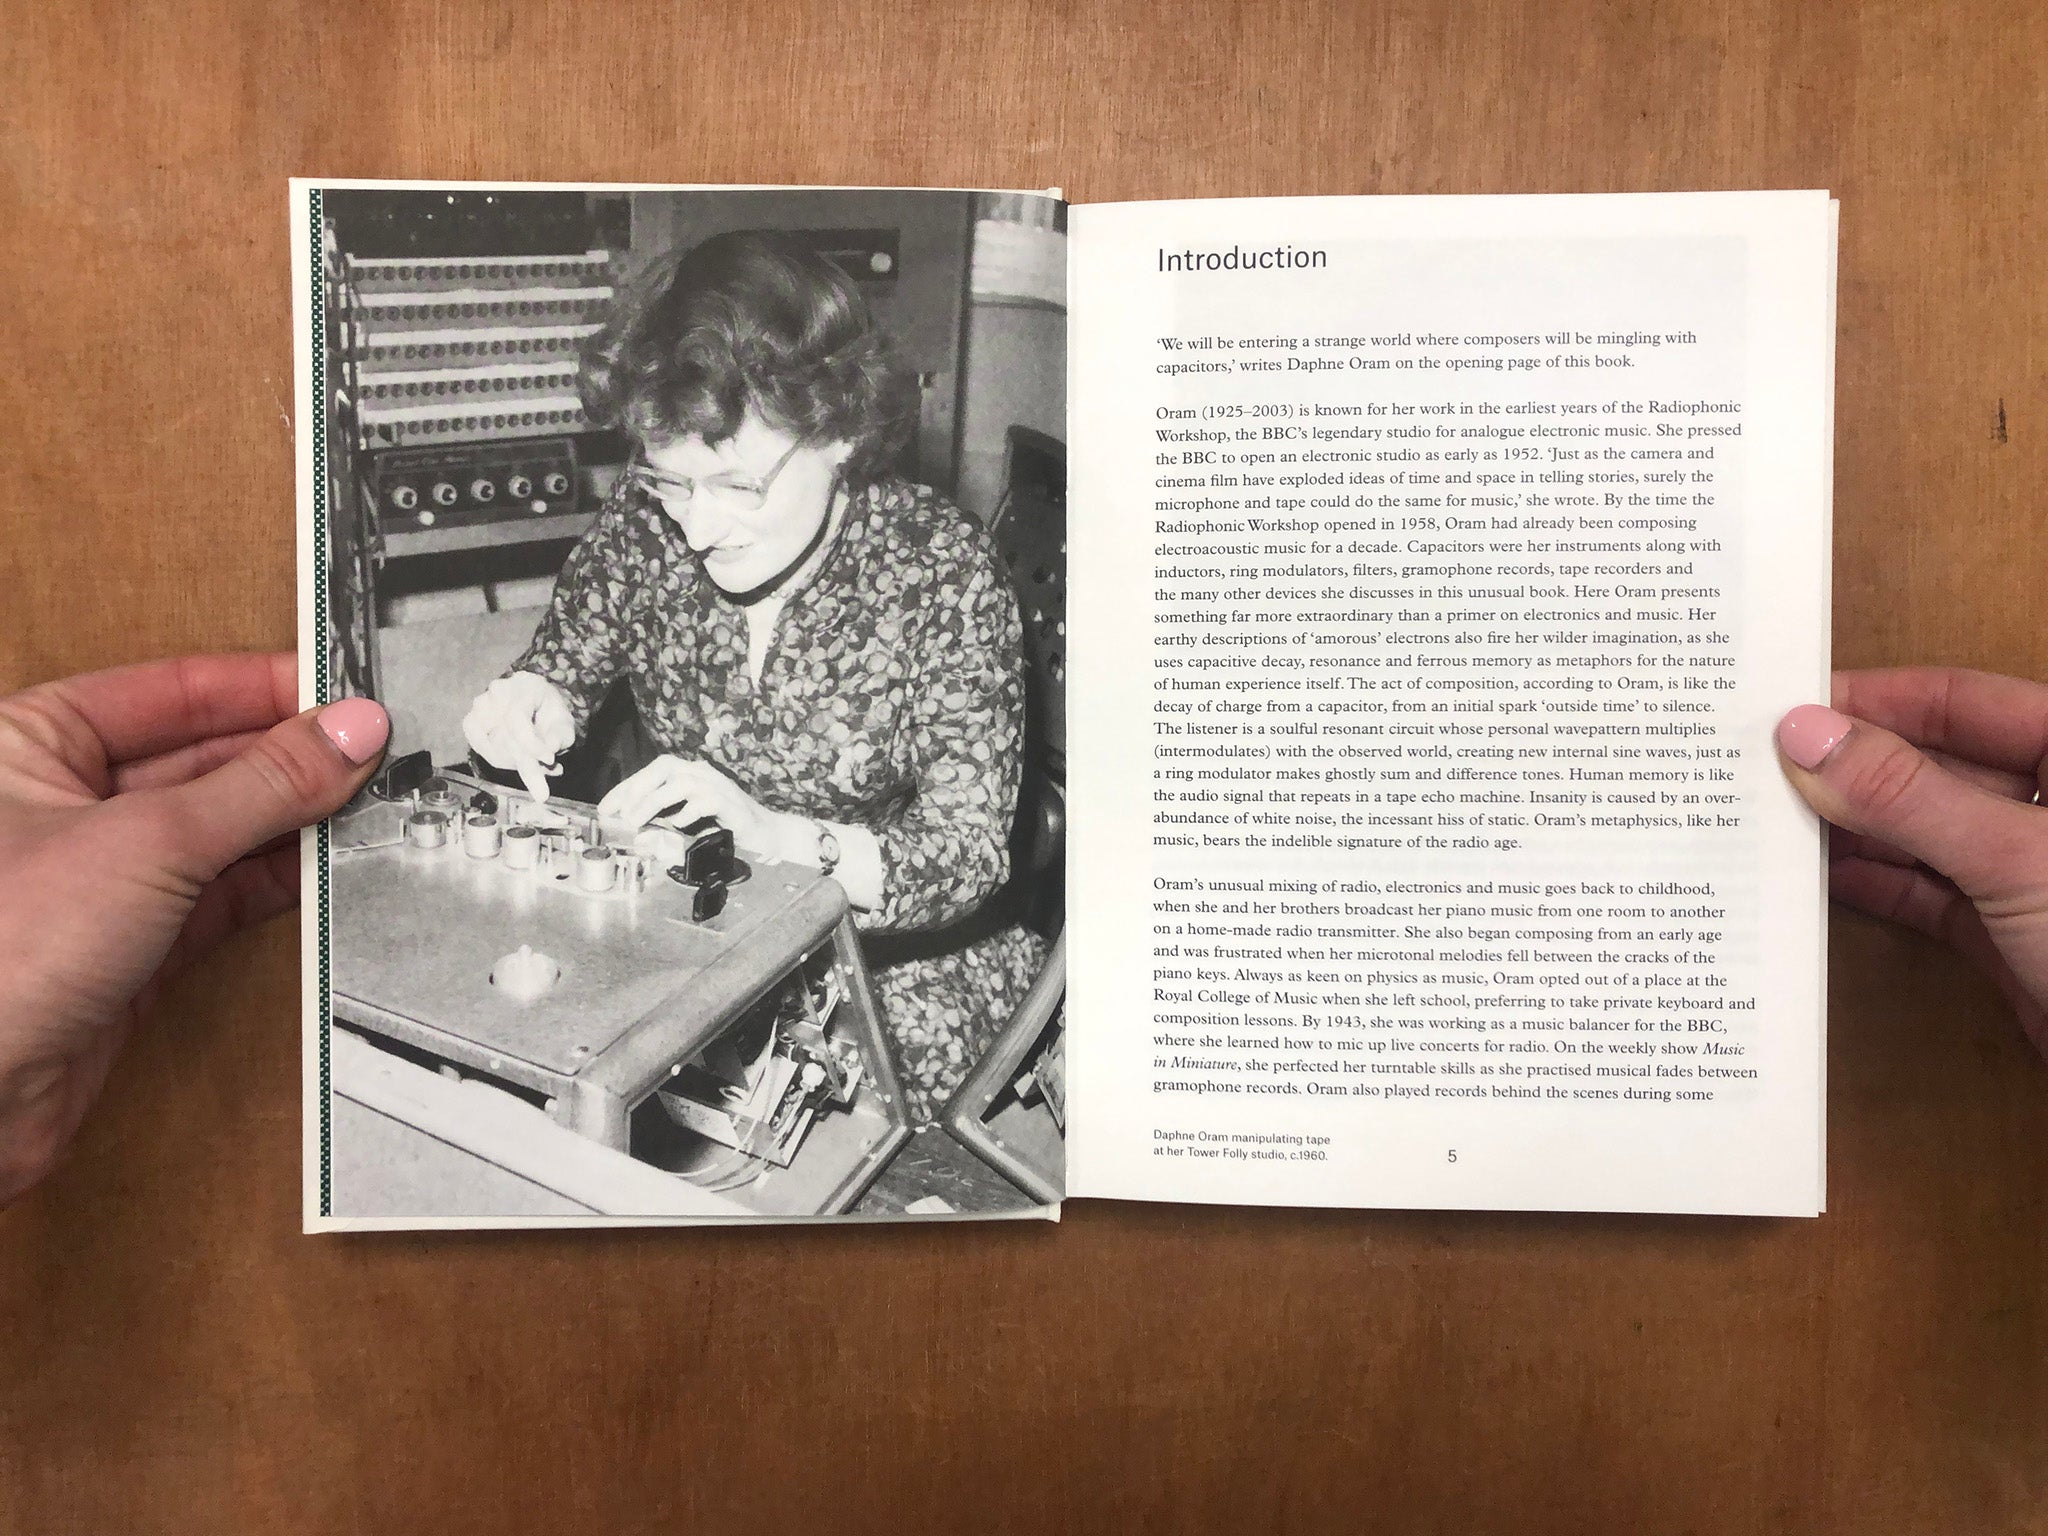 DAPHNE ORAM: AN INDIVIDUAL NOTE OF MUSIC, SOUND AND ELECTRONICS